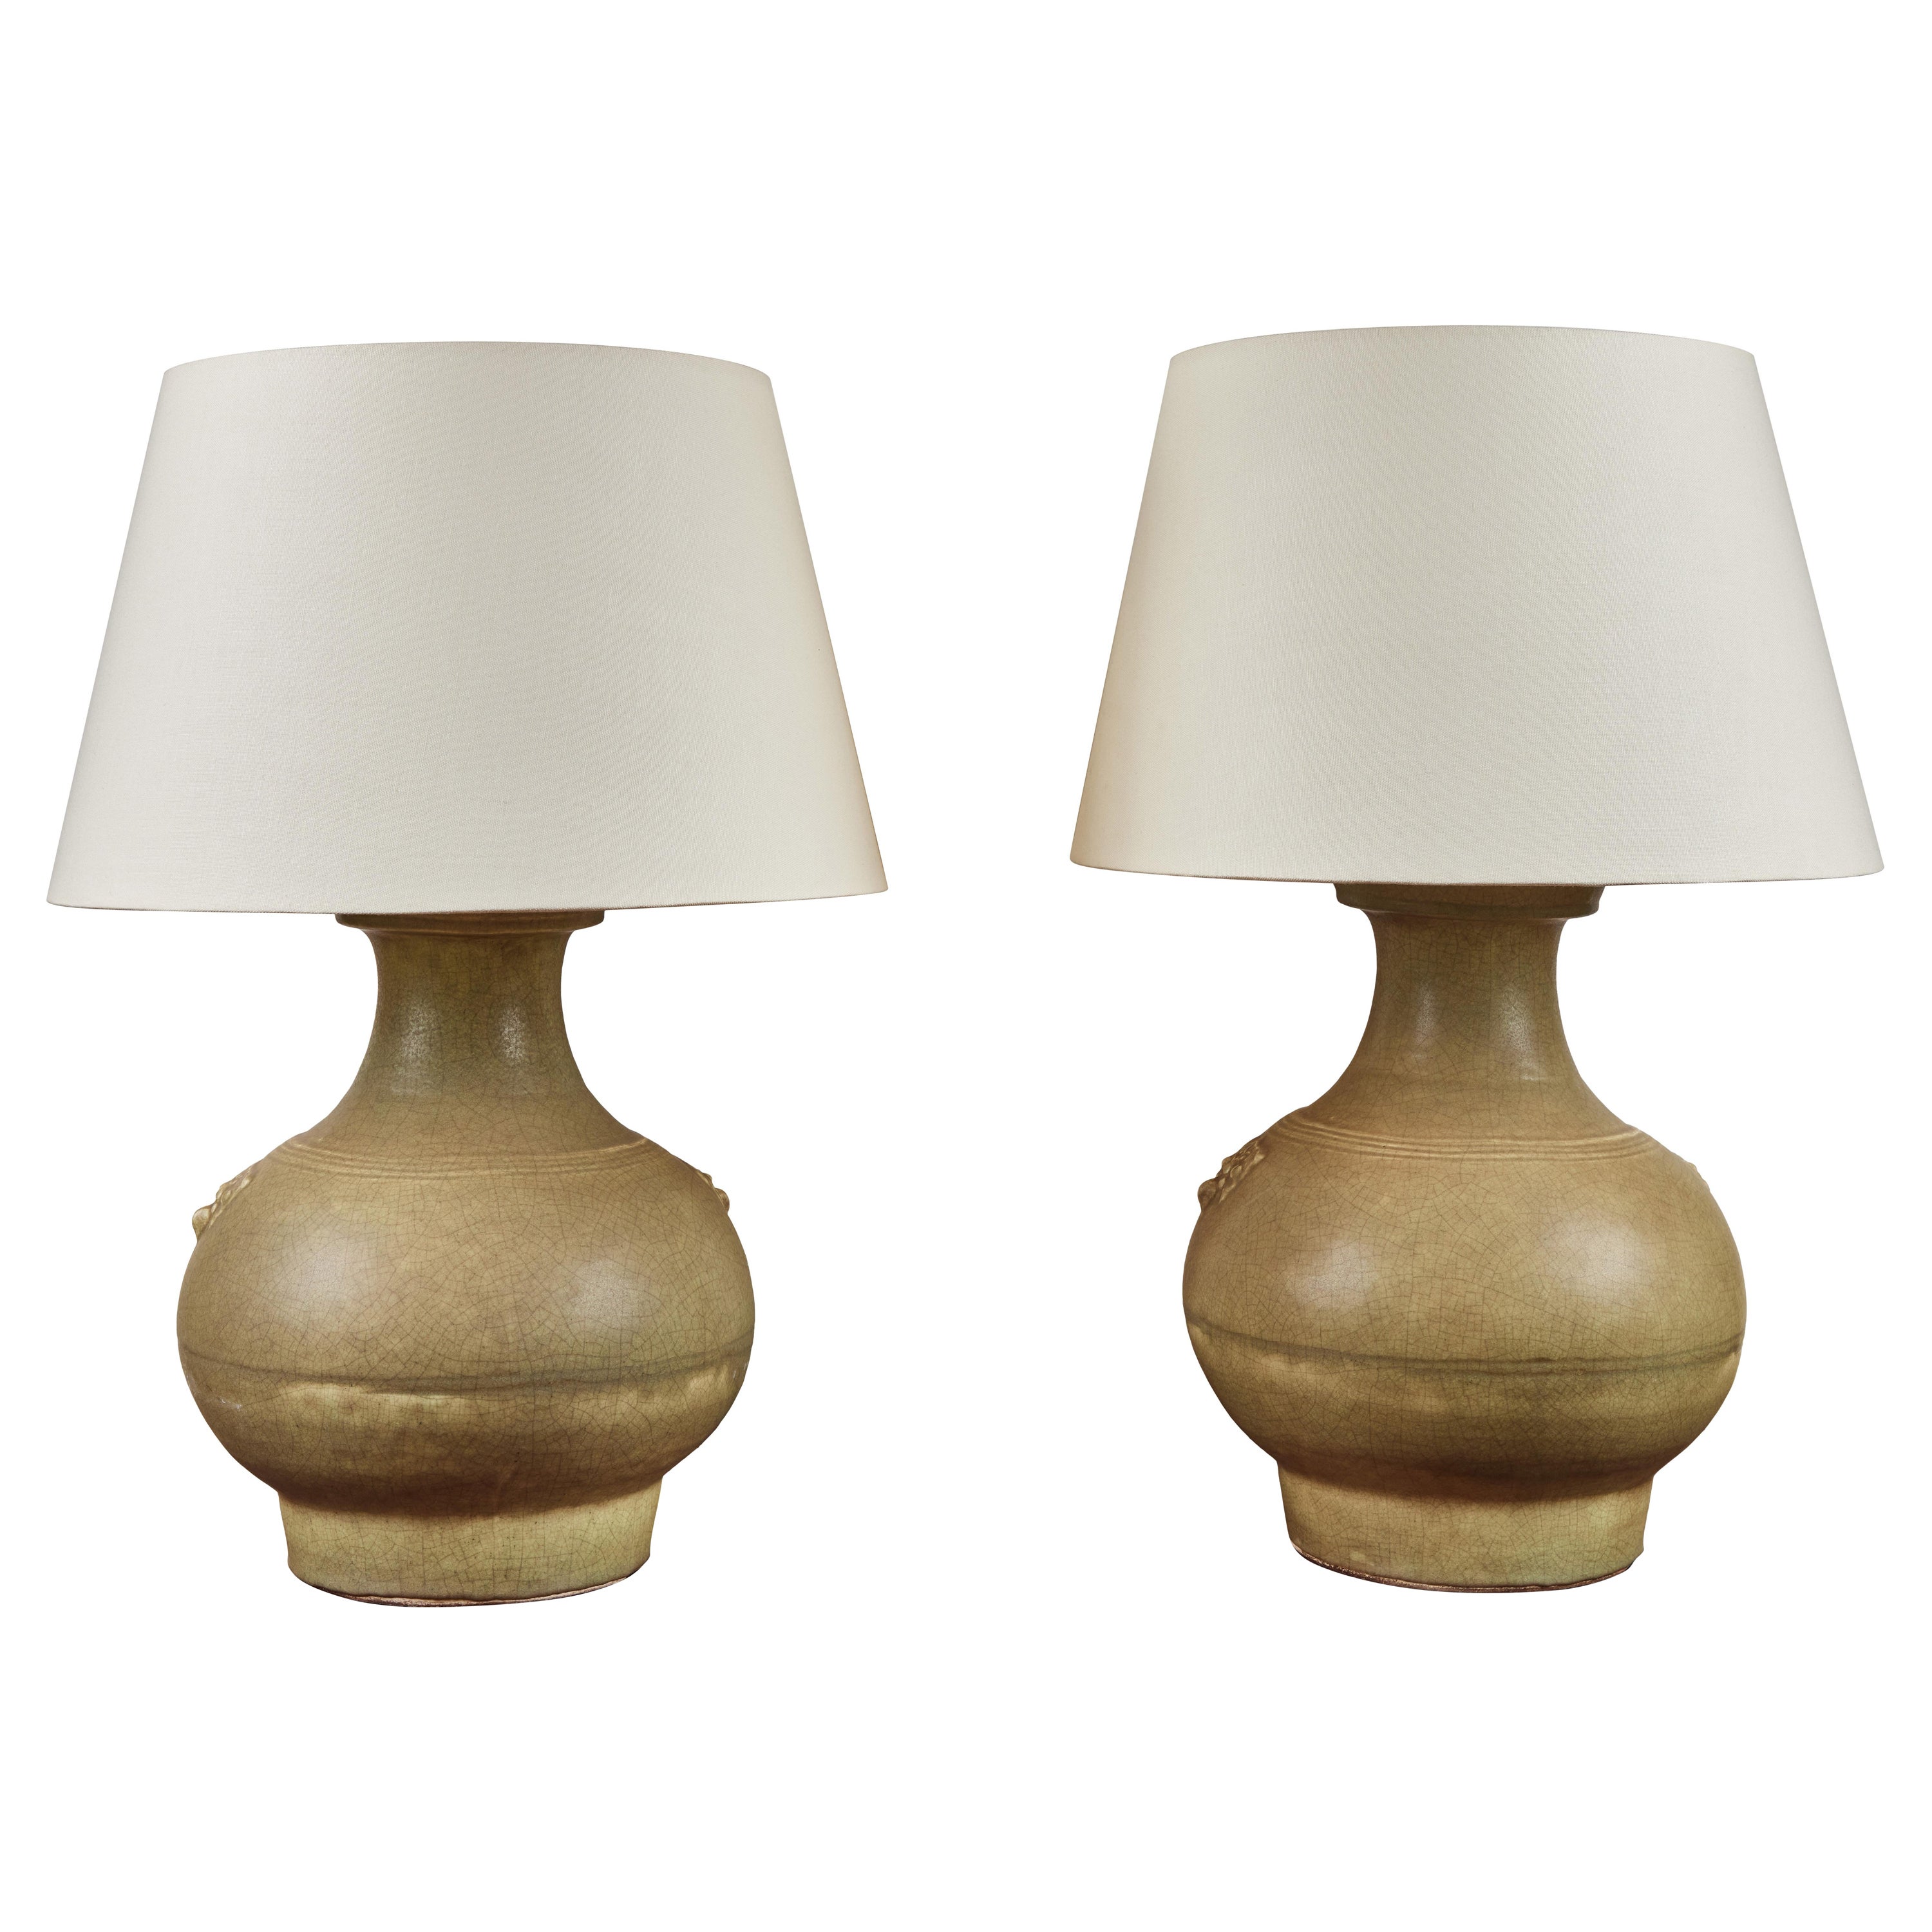 Han Style Table Lamps